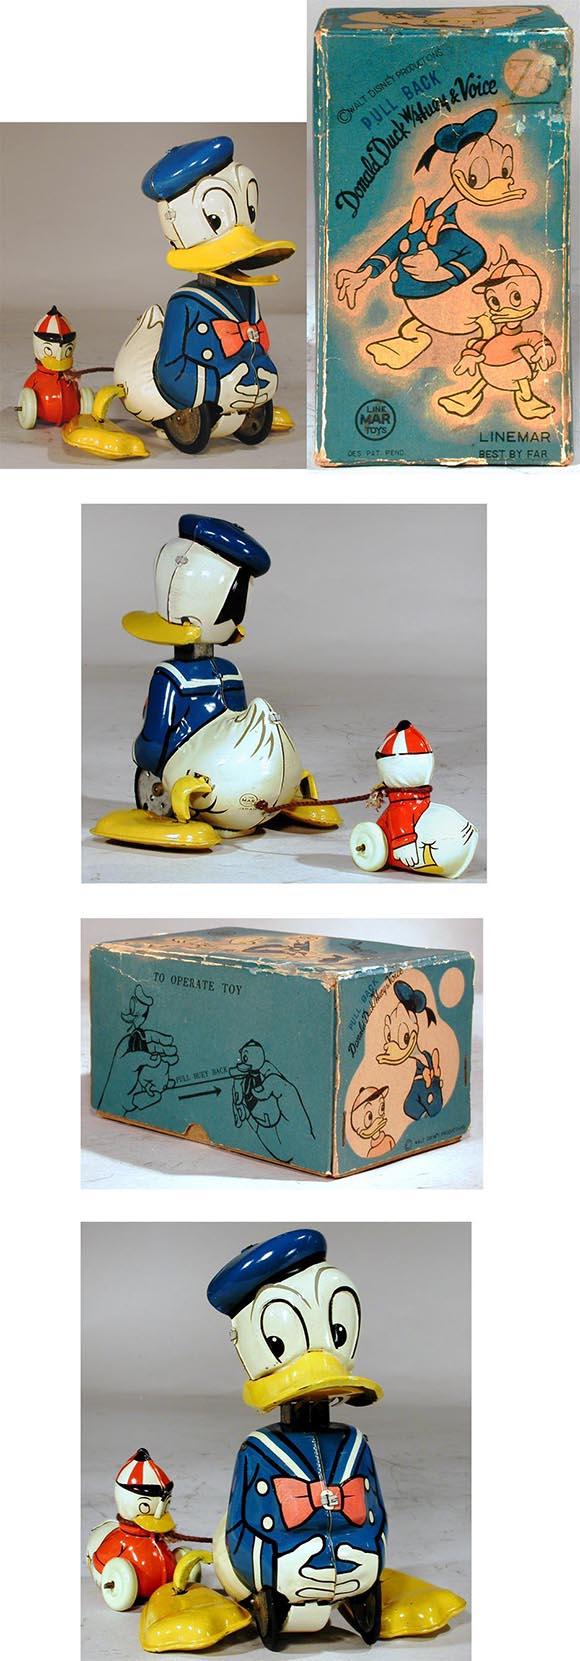 c.1955 Linemar, Donald Duck with Huey and Voice in Original Box